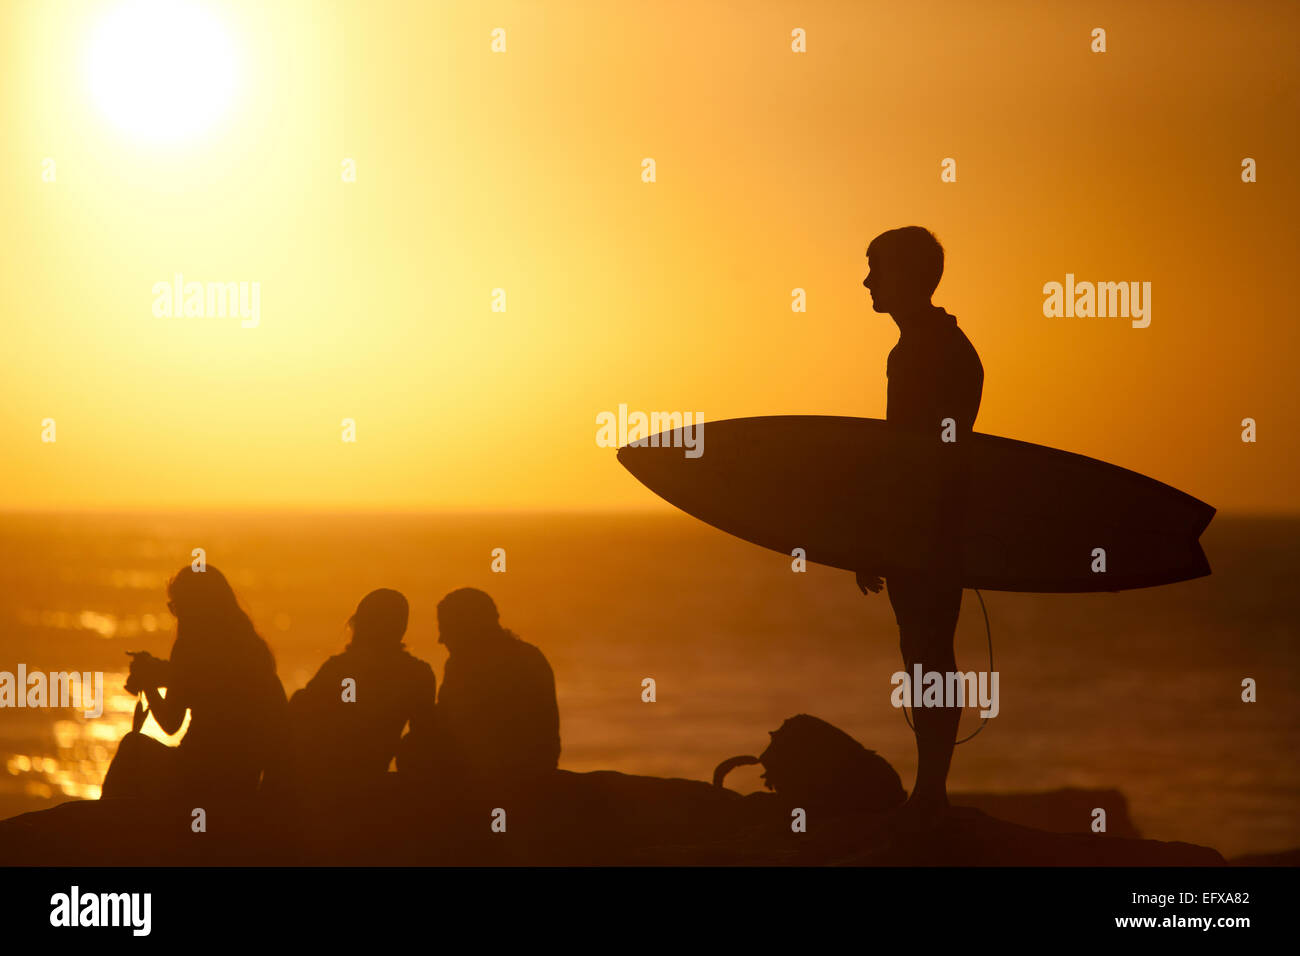 Surfer carrying surfboard on beach at sunset, Taghazout, Maroc Banque D'Images